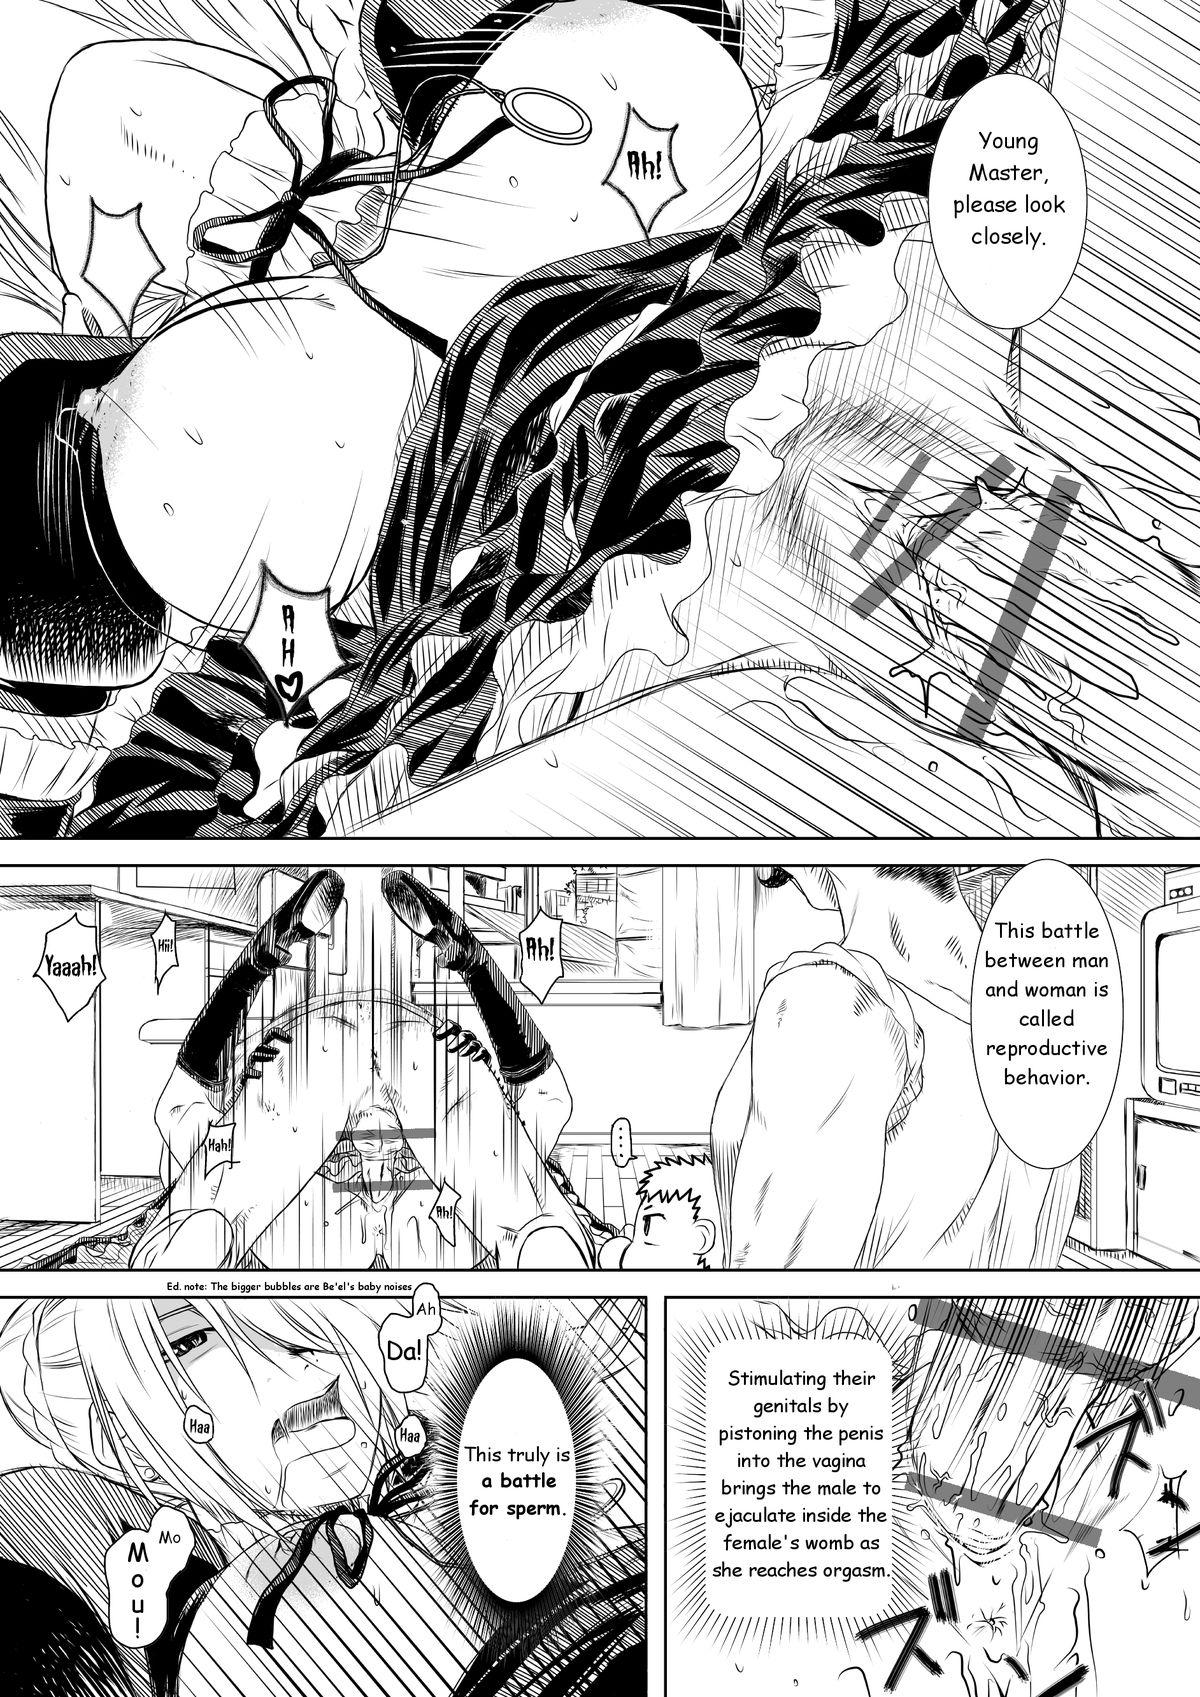 Licking Hilda-san's Sex Ed. for Good Little Boys - Beelzebub Pussy Eating - Page 15